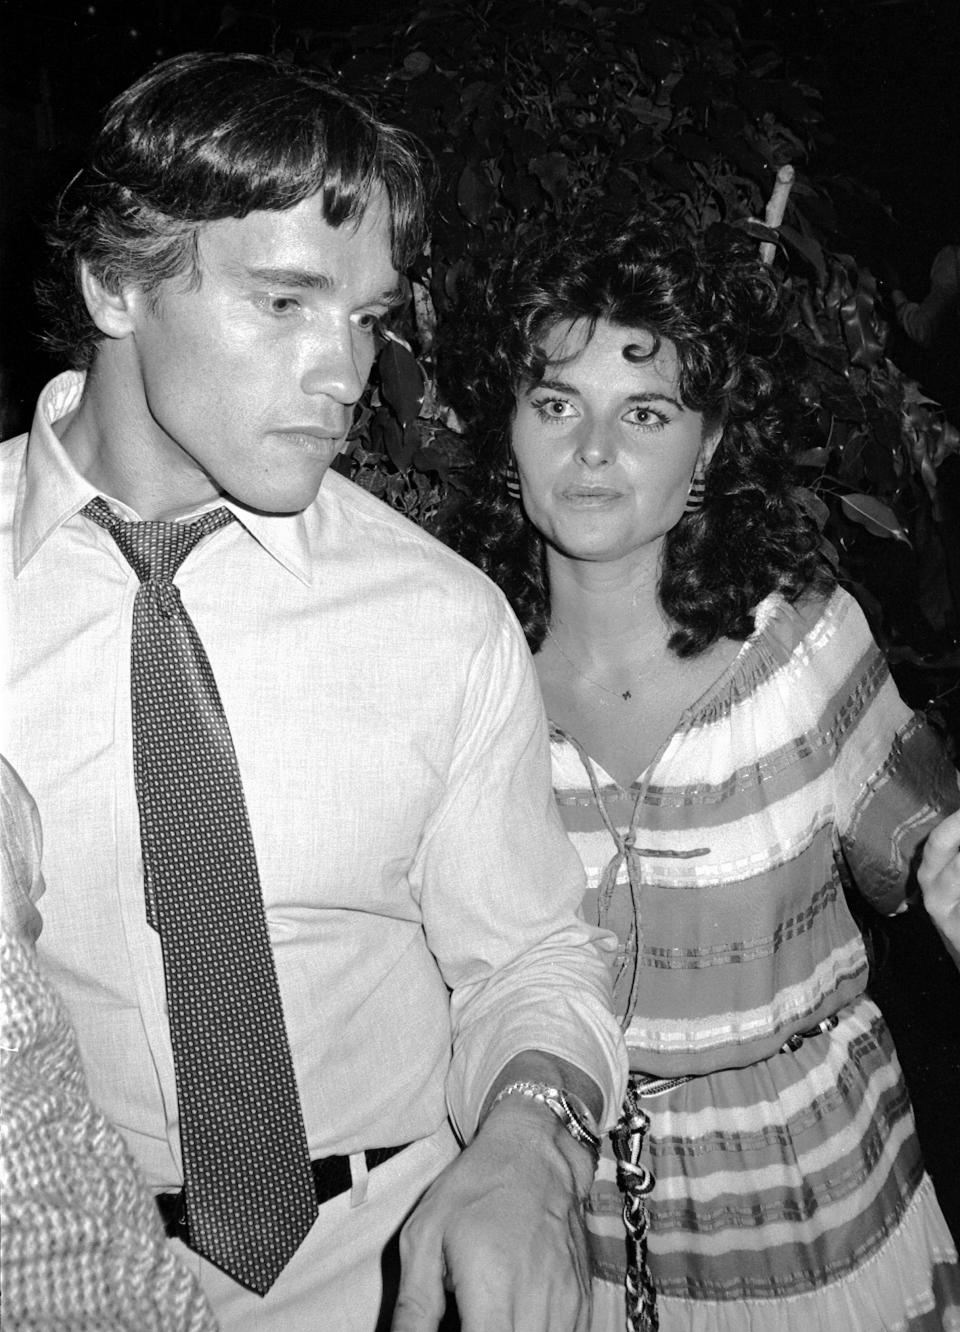 Arnold Schwarzenegger and Maria Shriver at Studio 54 in New York City, four years before they married.